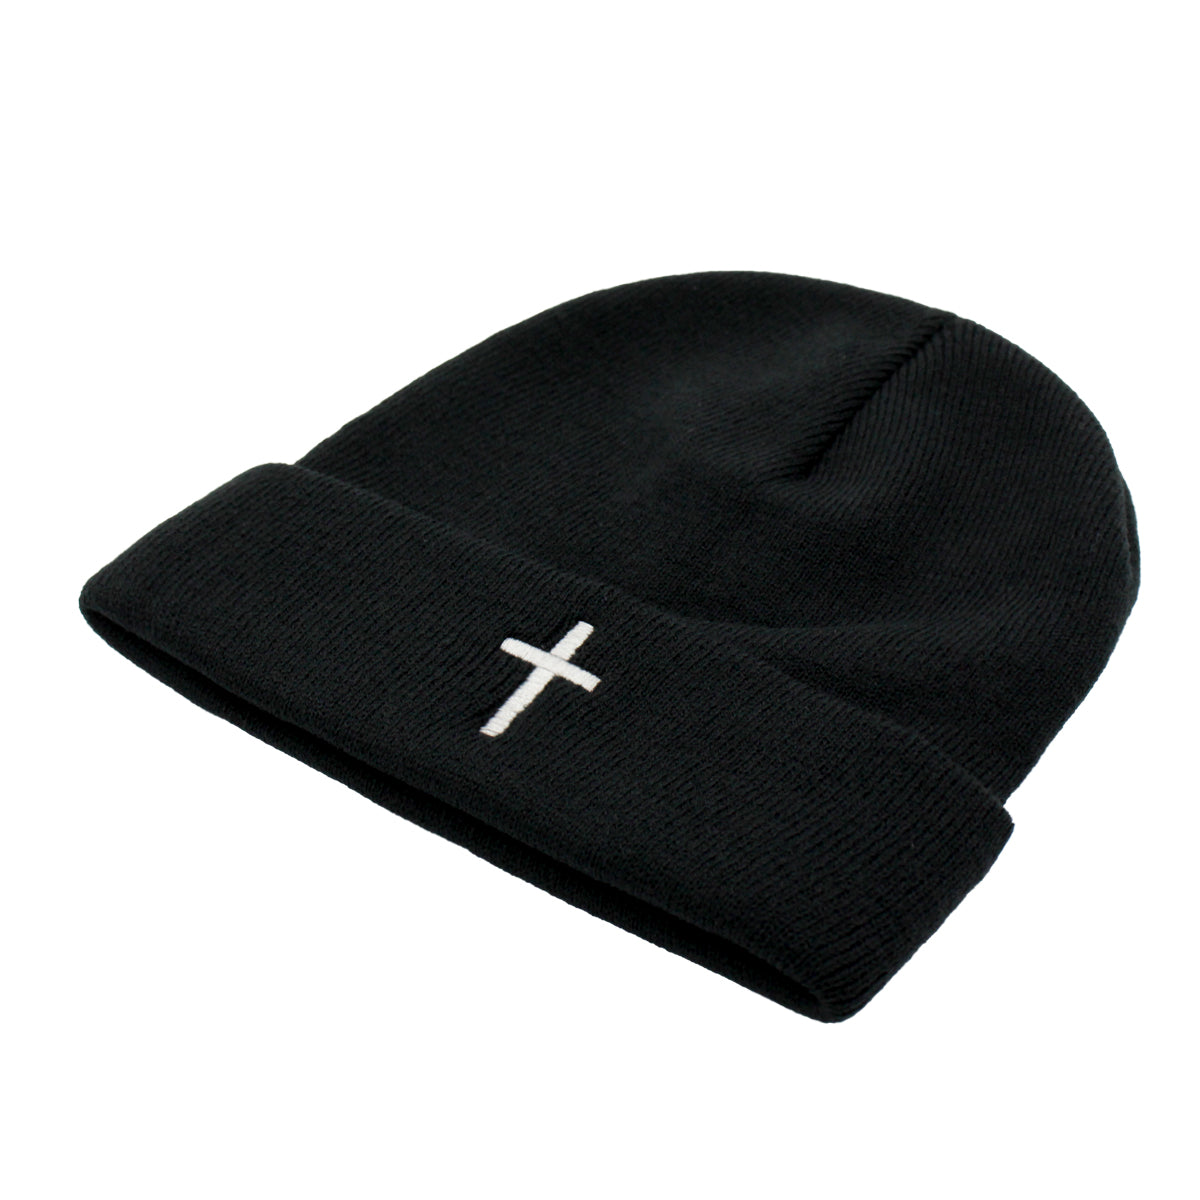 Unisex Knit Beanie Hat with Faith Cross Embroidery - Warm & Stylish, Perfect for Winter Outdoor Activities & Daily Use for Both Men and Women - ACCEHUT